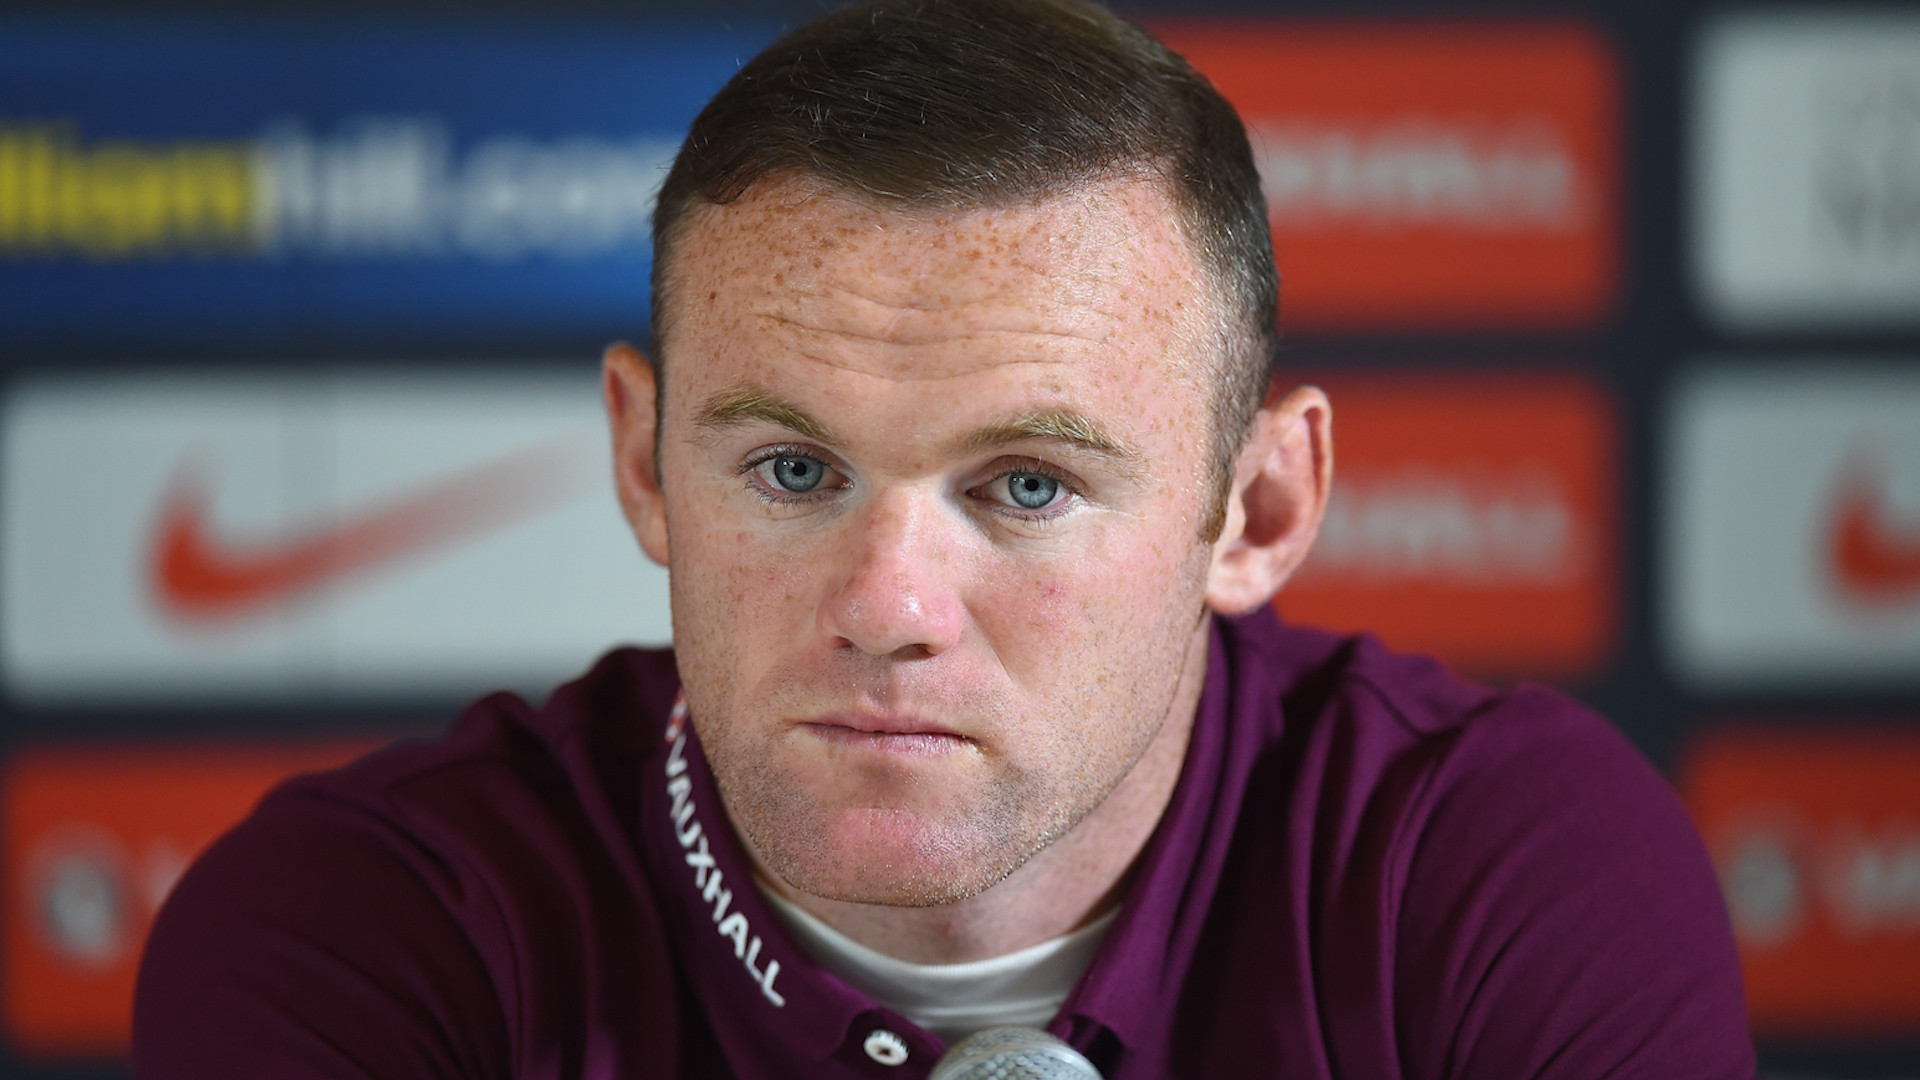 1920x1080 Soccer star Wayne Rooney arrested on 'drink-driving' charge WSB: Atlanta's  News, Weather and Traffic ...